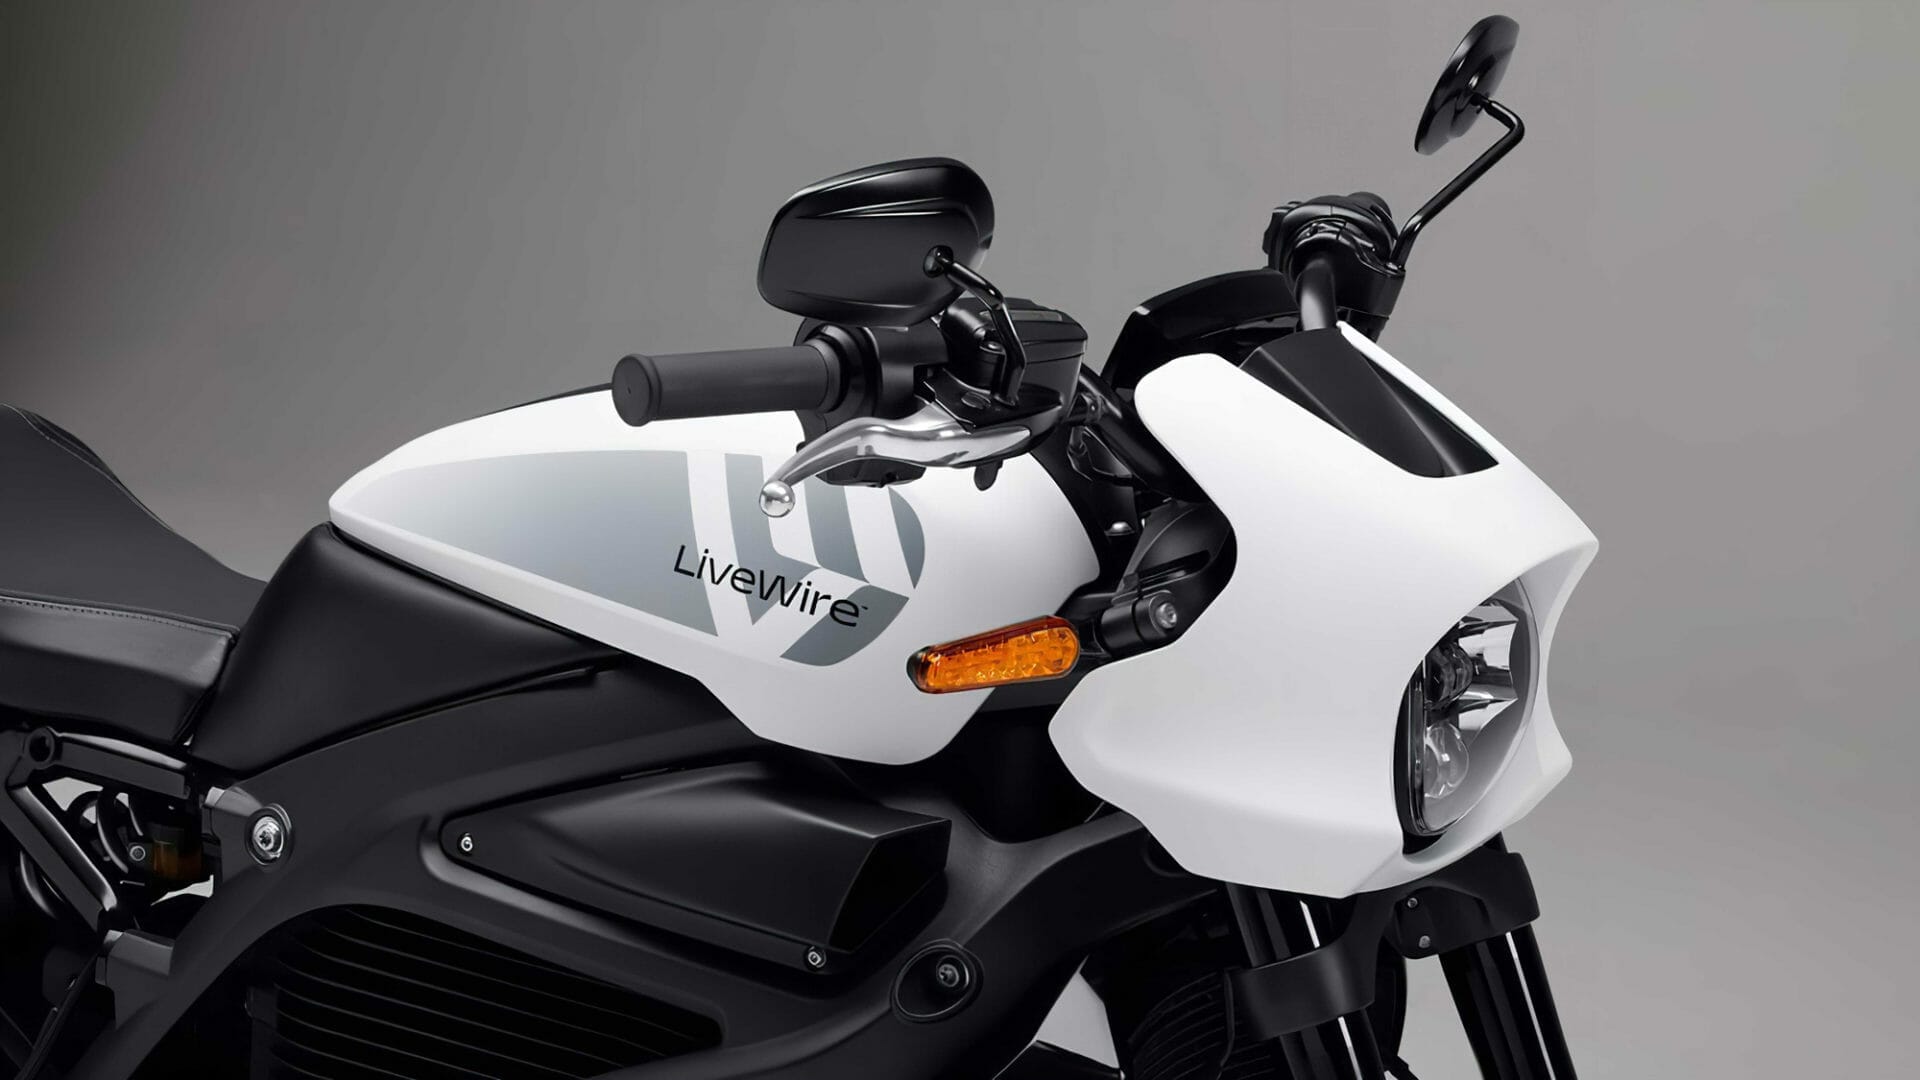 VIN filing reveals new LiveWire model?
- also in the MOTORCYCLES.NEWS APP